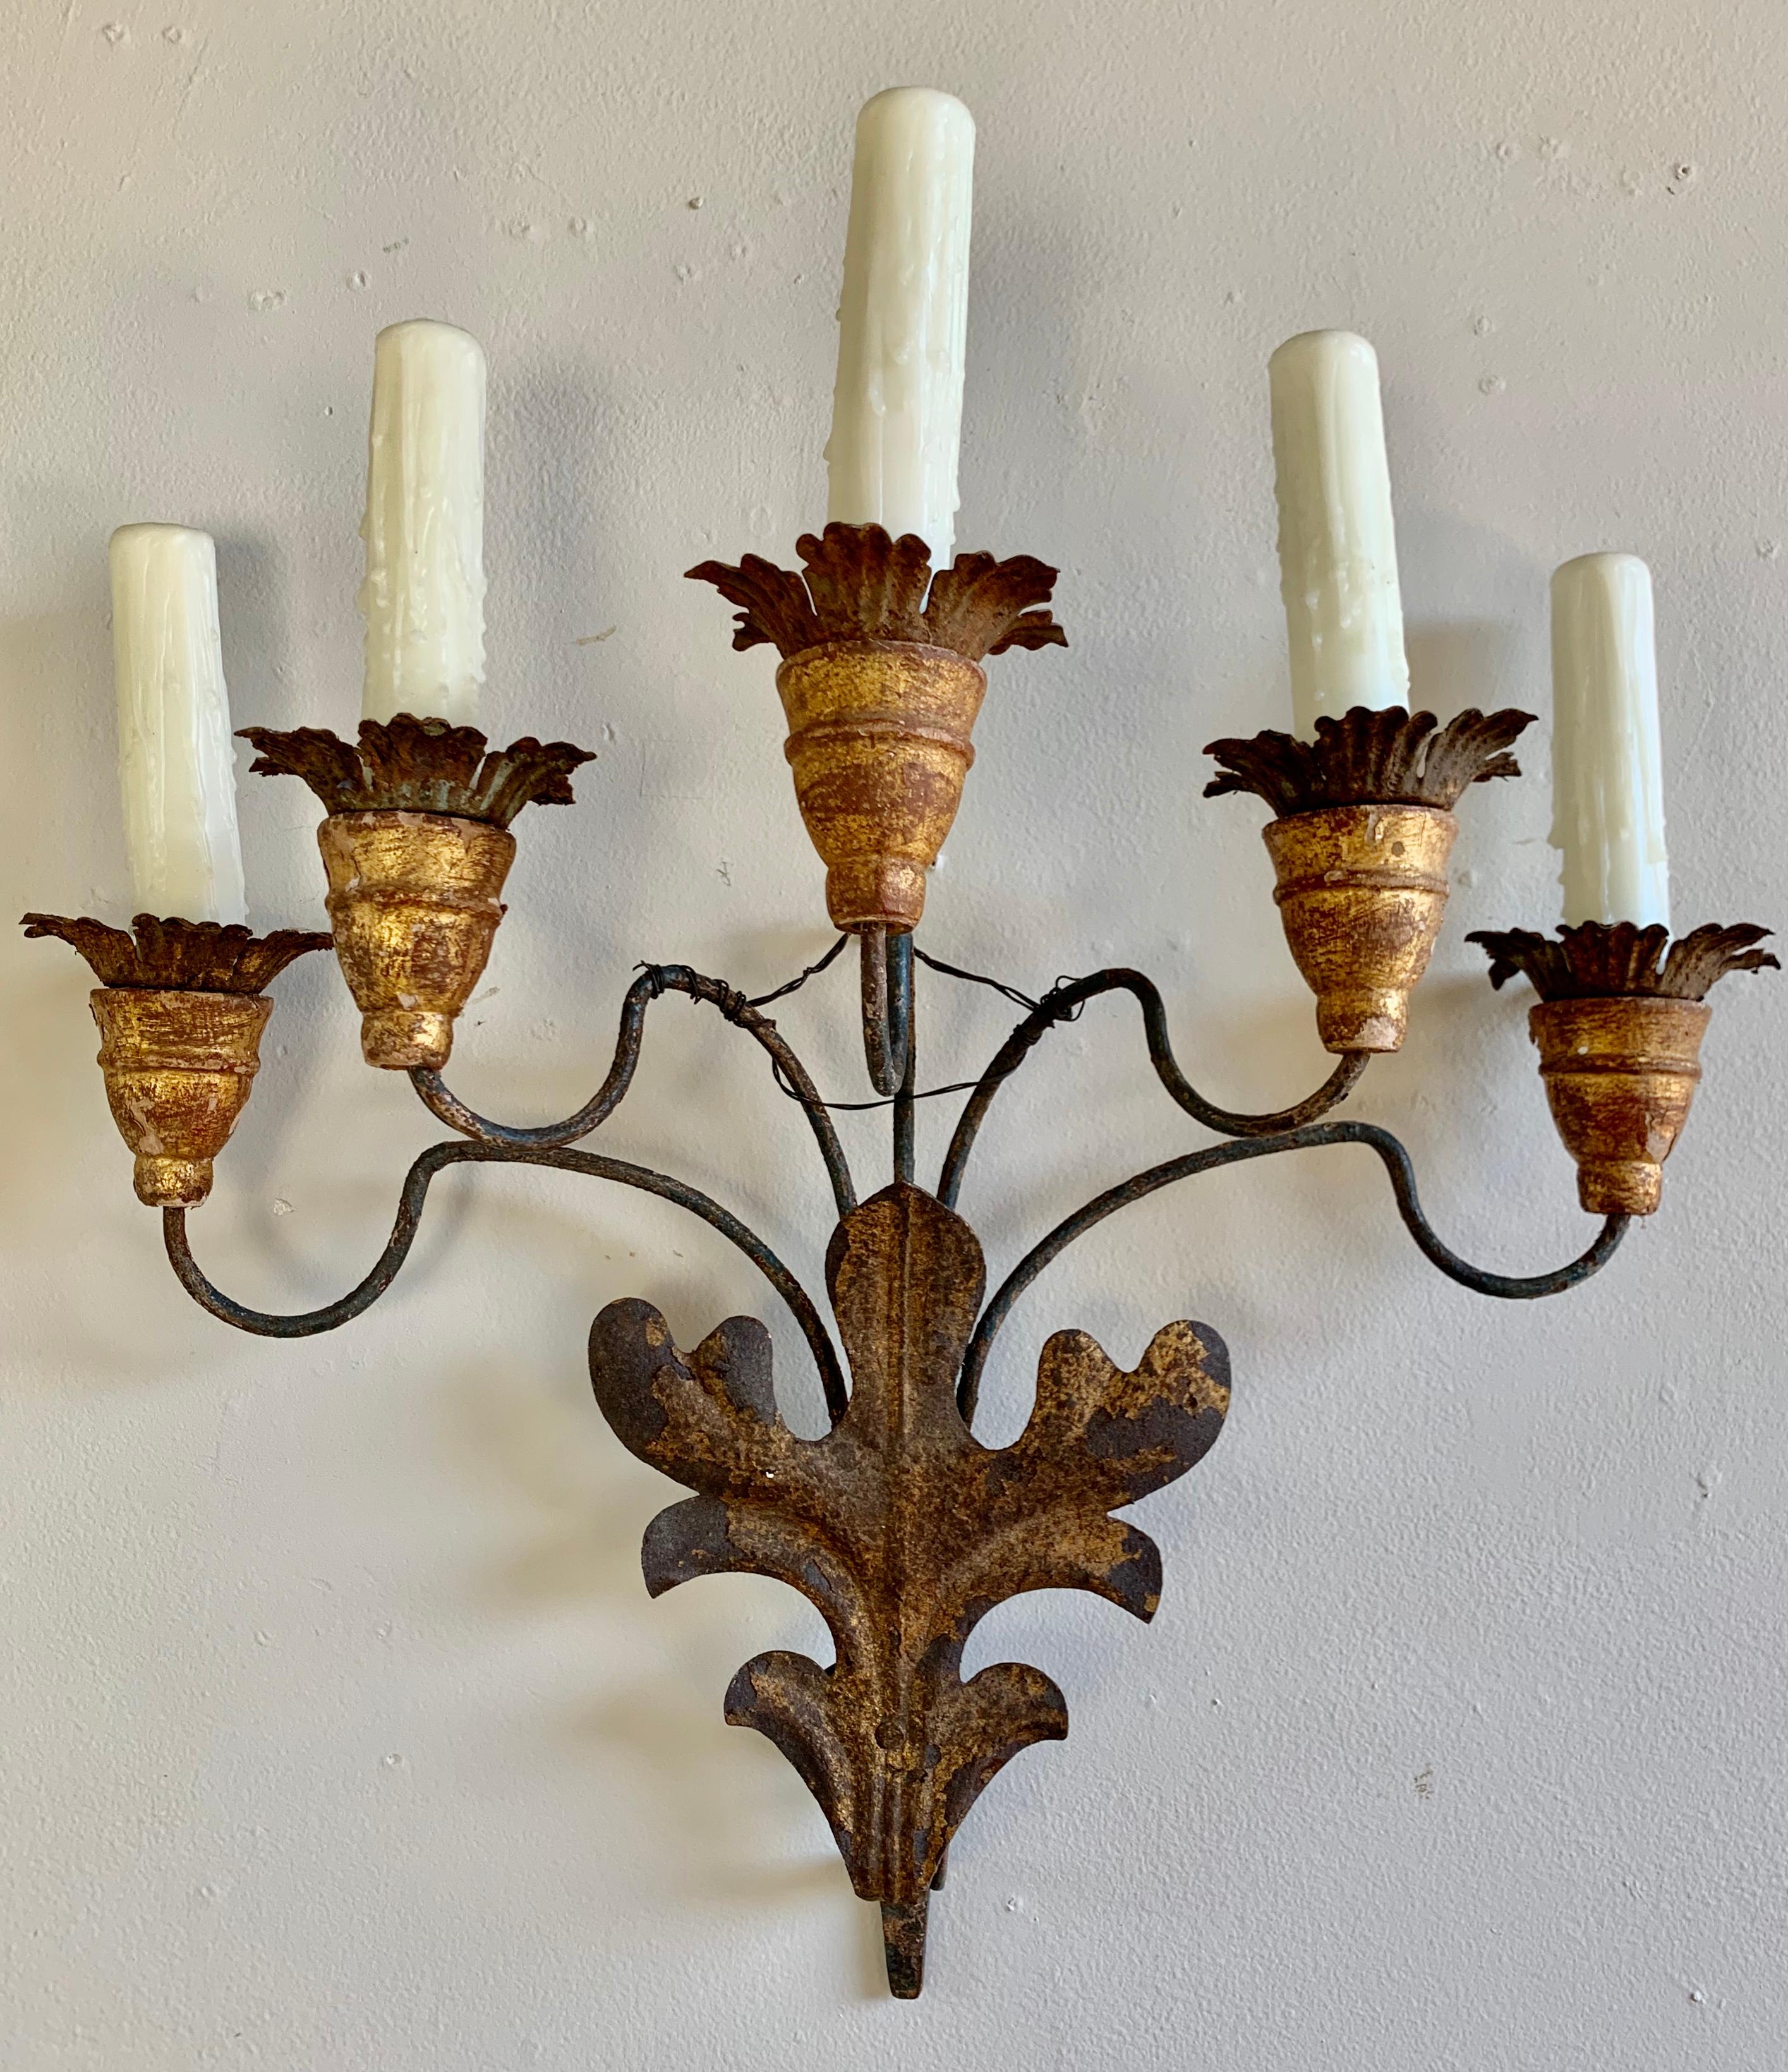 Pair of 19th century French 5-light iron & giltwood sconces that have been electrified with cream colored wax candle covers. The sconces are newly wired and ready to install.